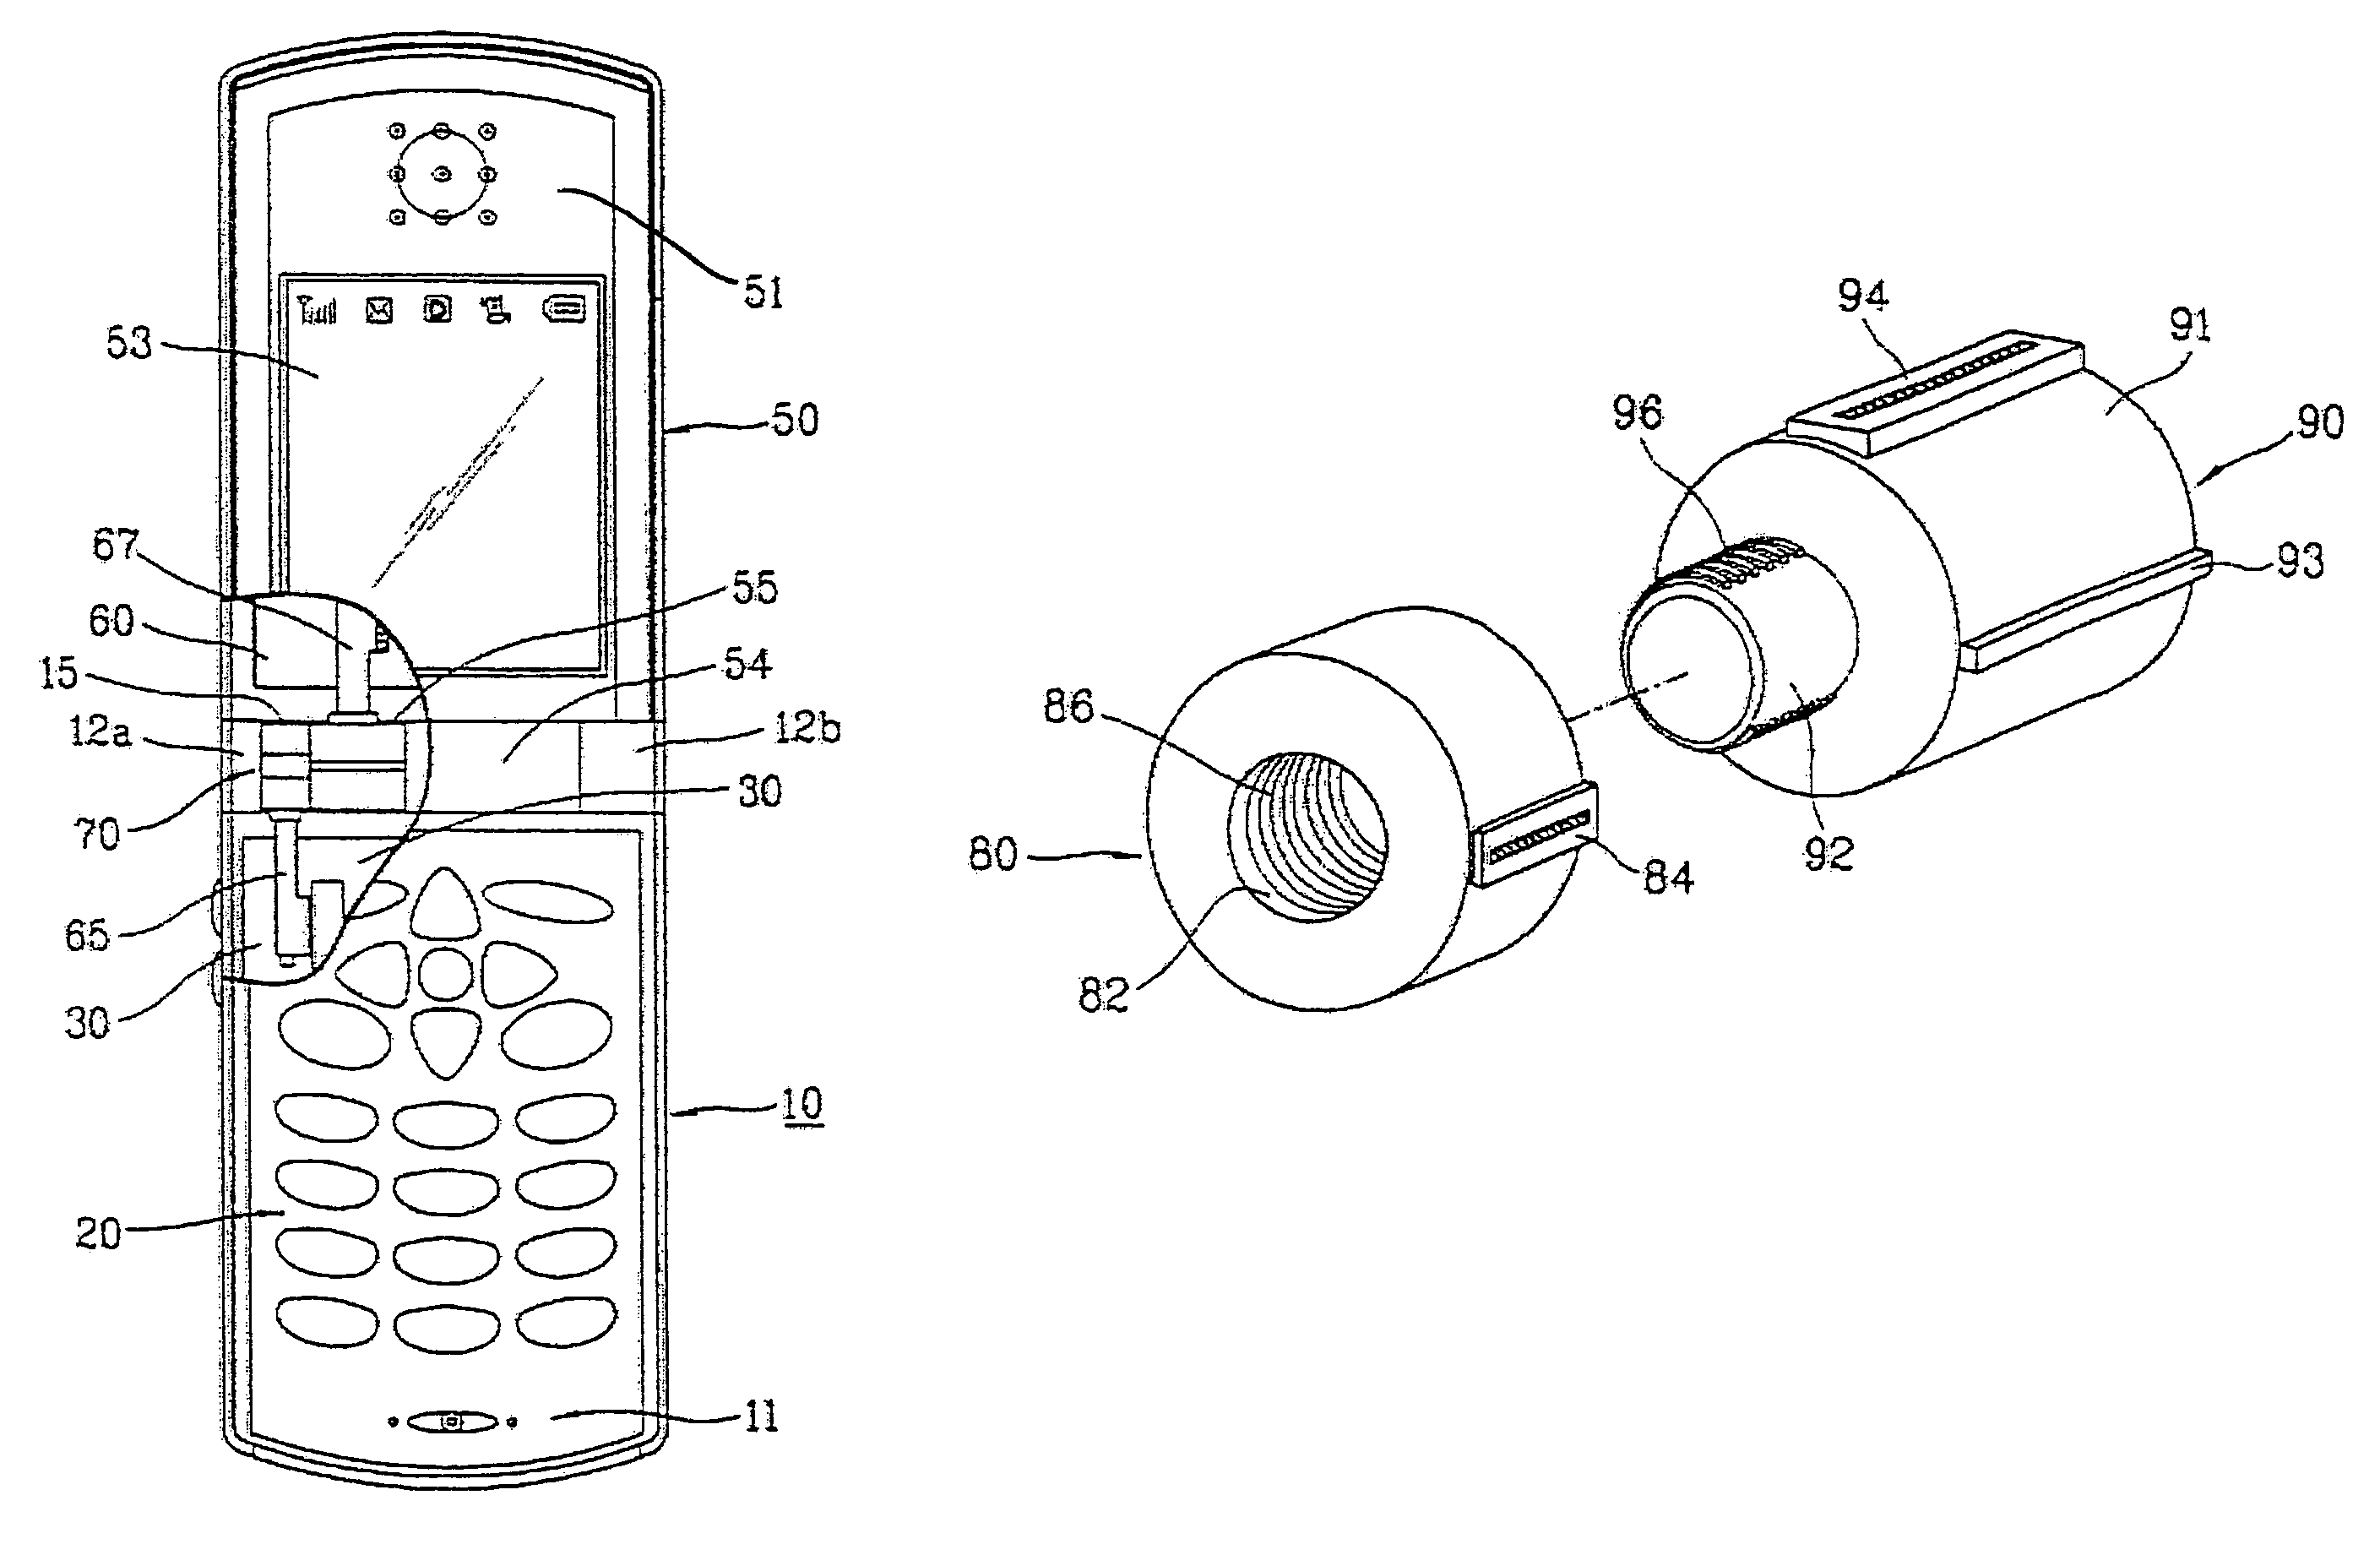 FPCB connection mechanism